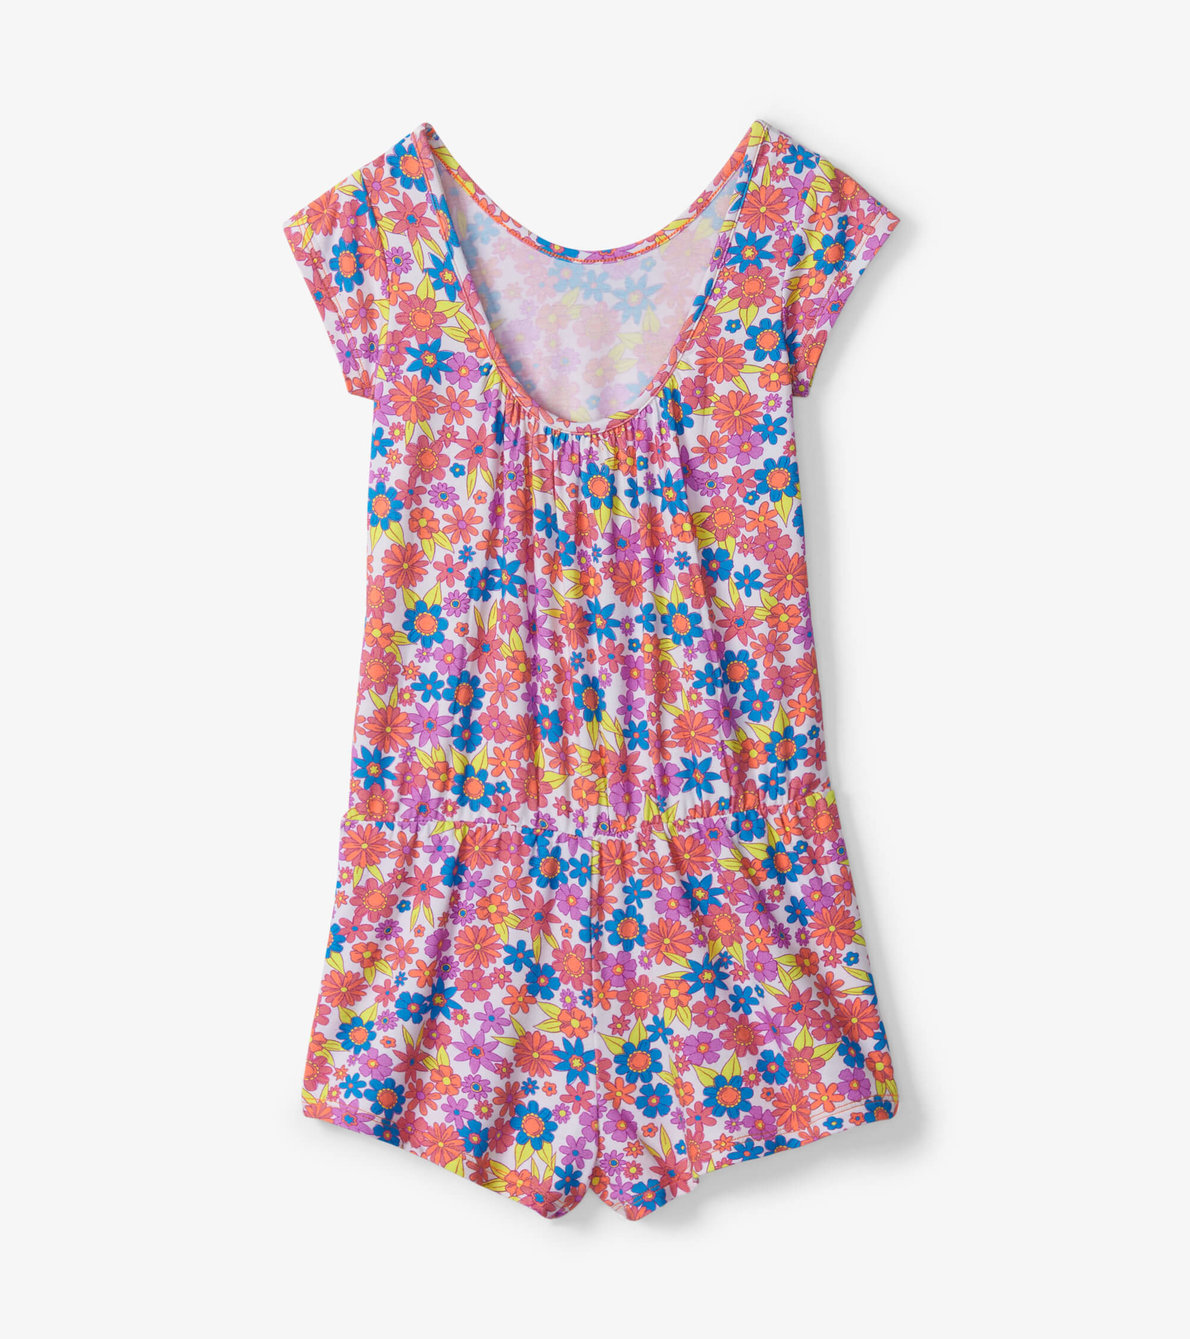 View larger image of Retro Floral Romper